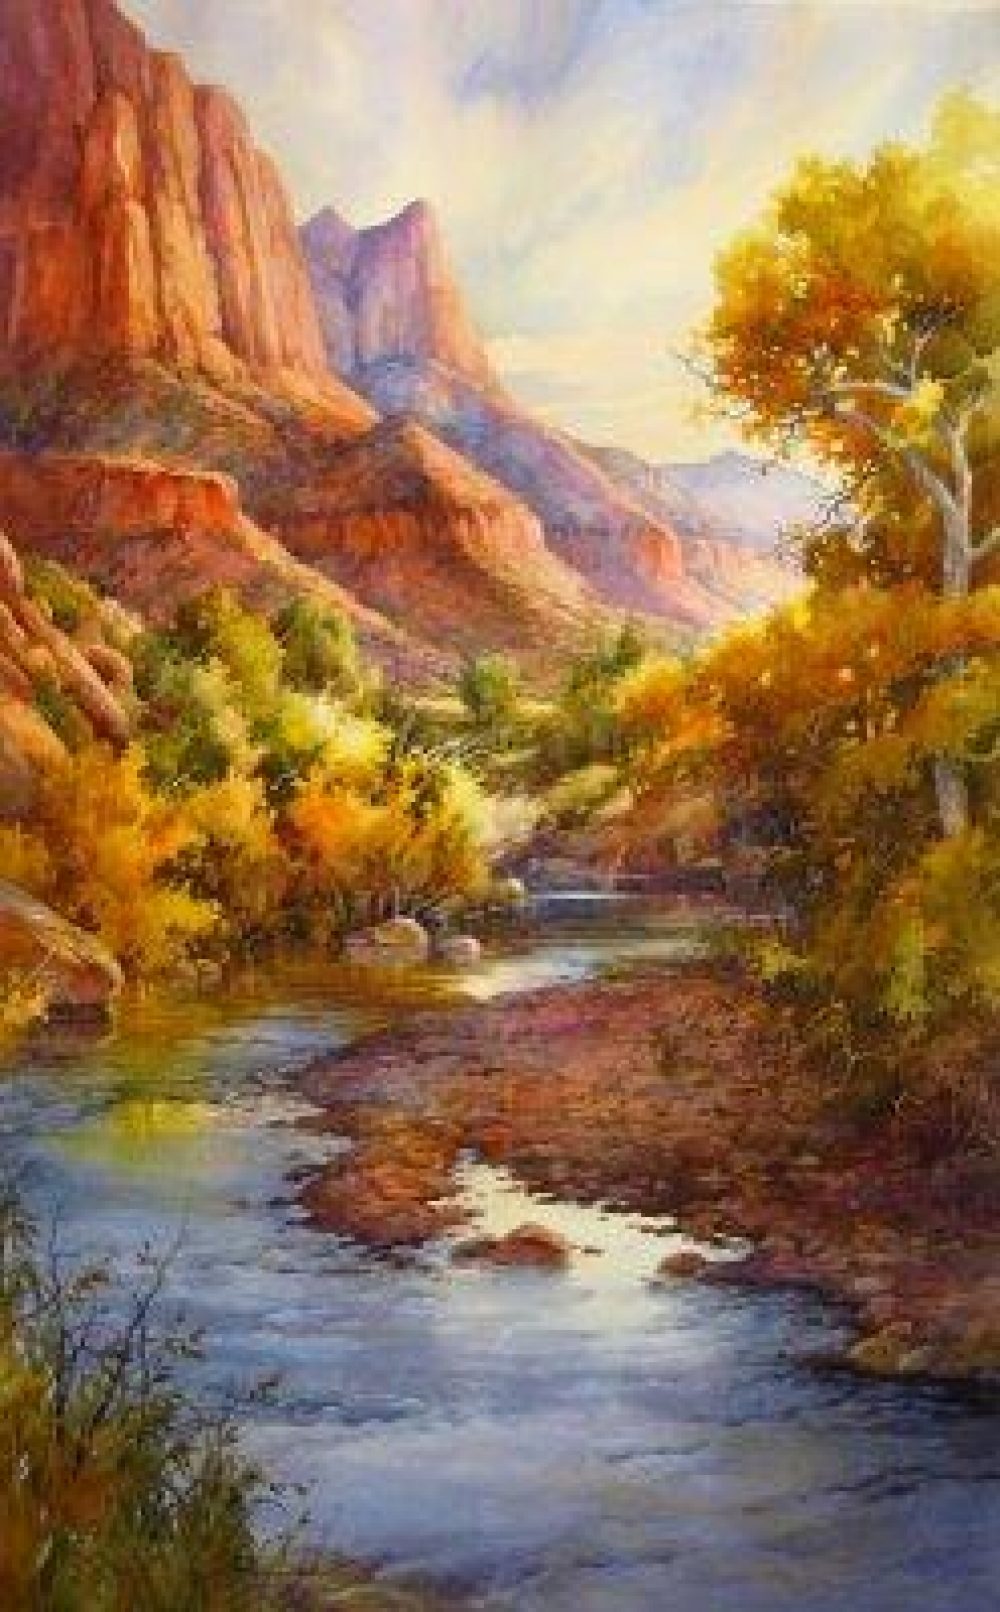 Virgin Beauty in Zion - Giclee Print - Giclee From original watercolor painting of Virgin River in Zion National Park